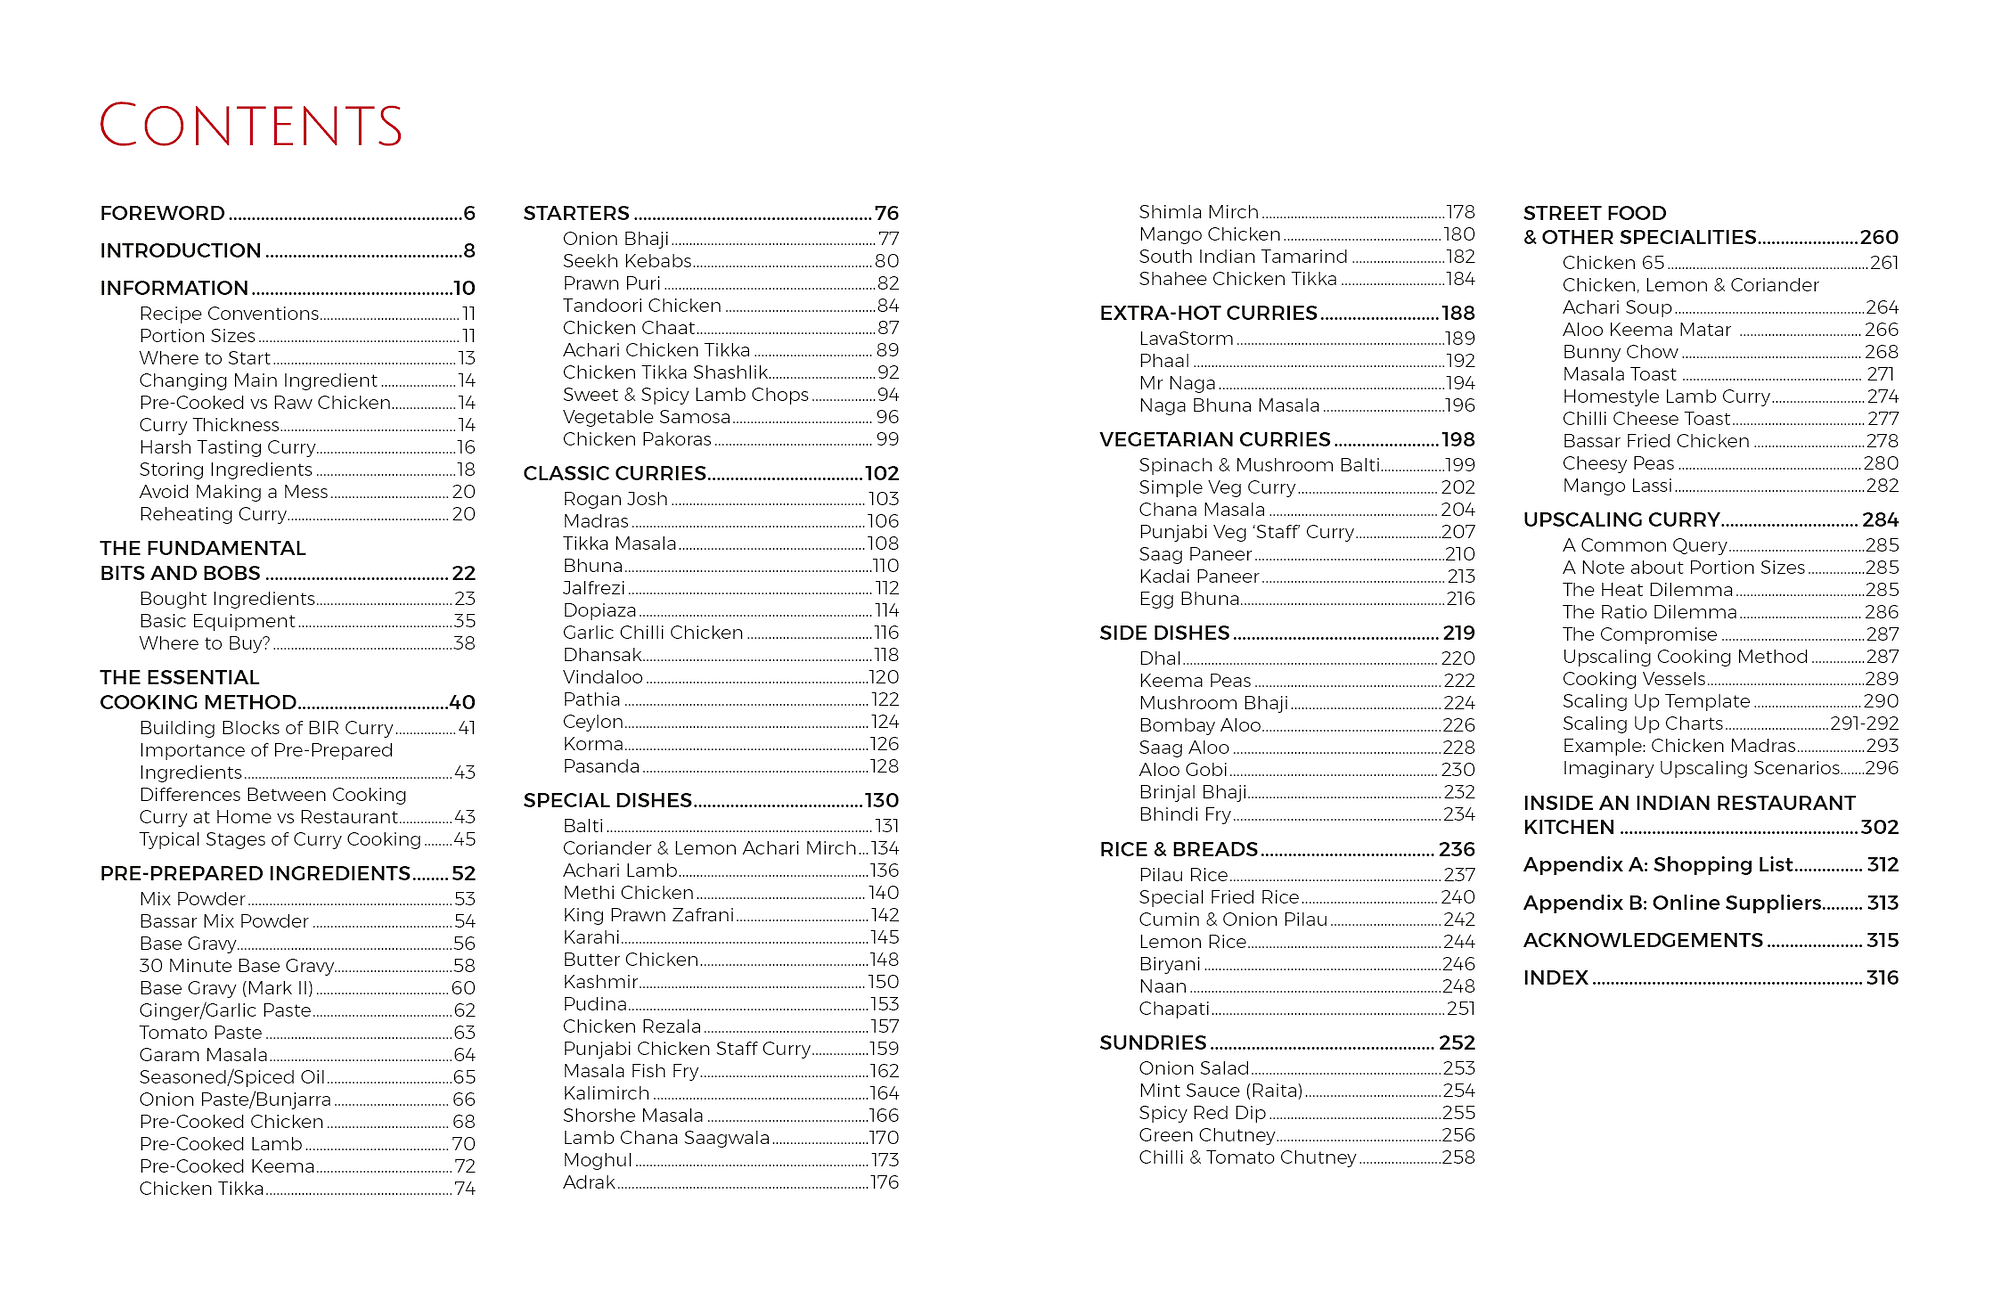 Contents Page from Curry Compendium